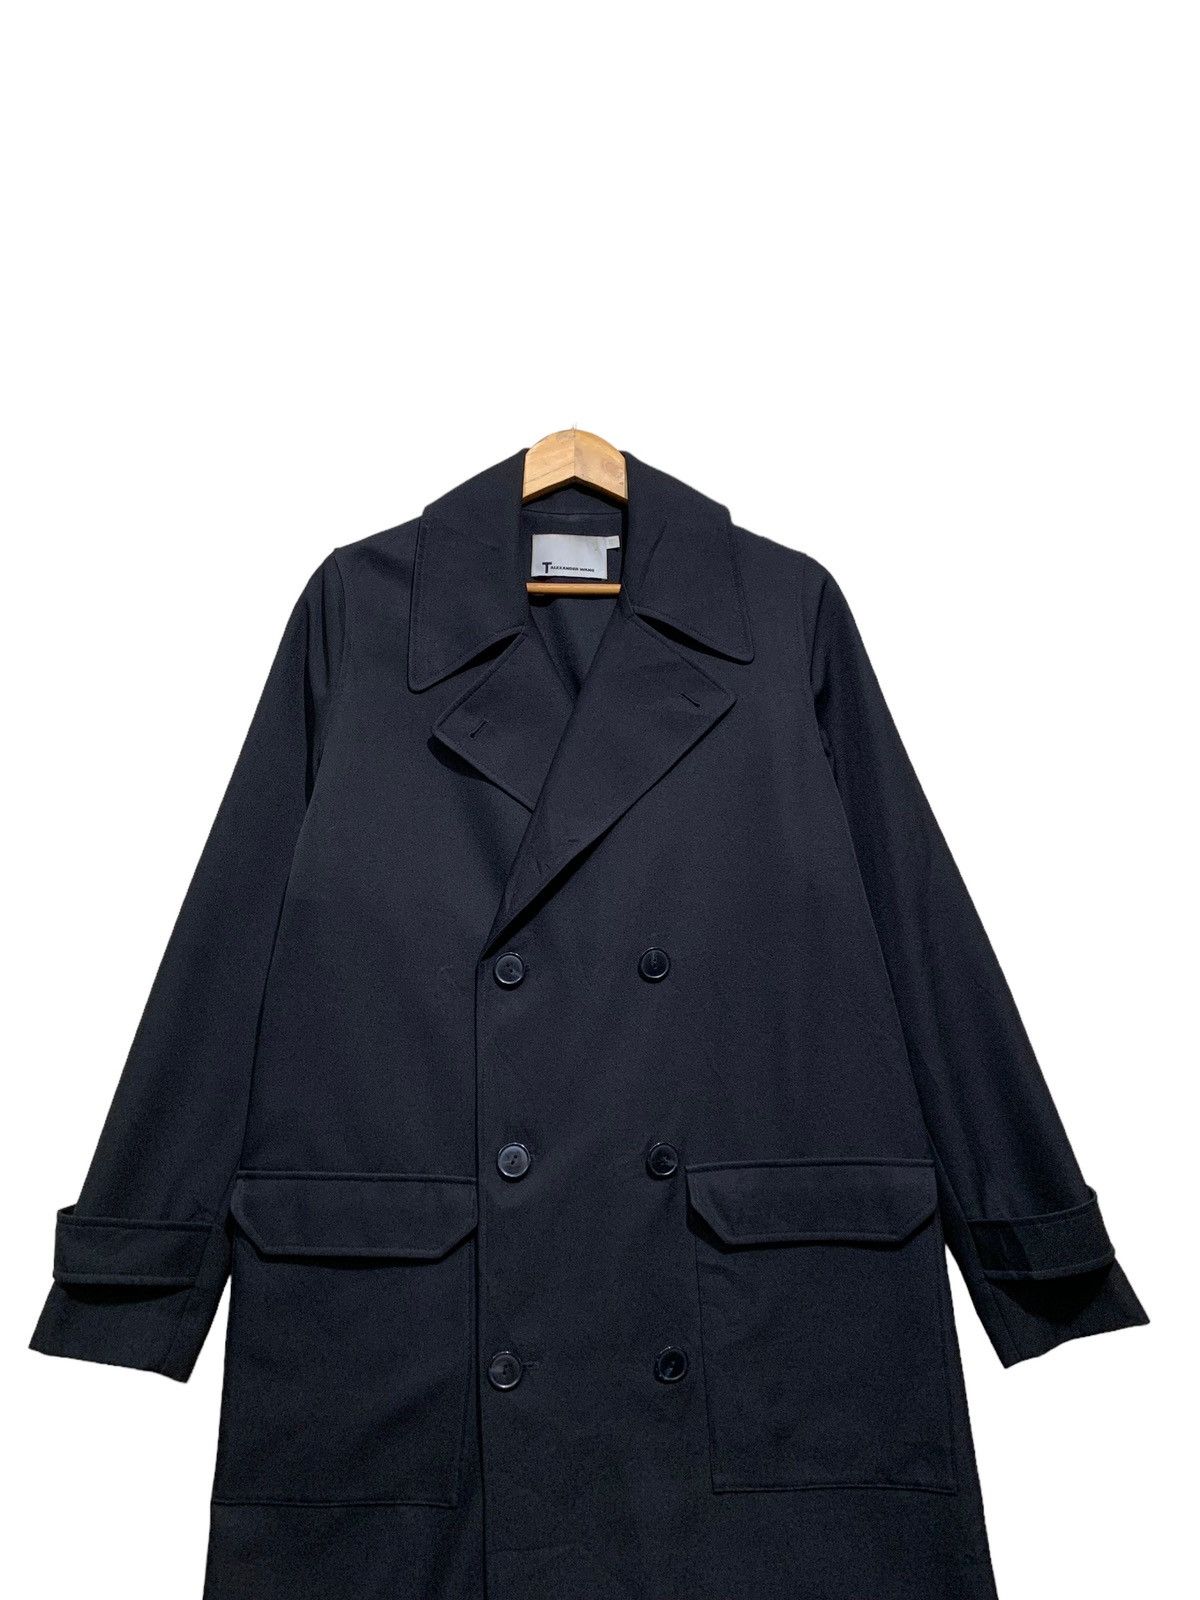 🔥ALEXANDER WANG DOUBLE BREAST TRENCH COATS - 4